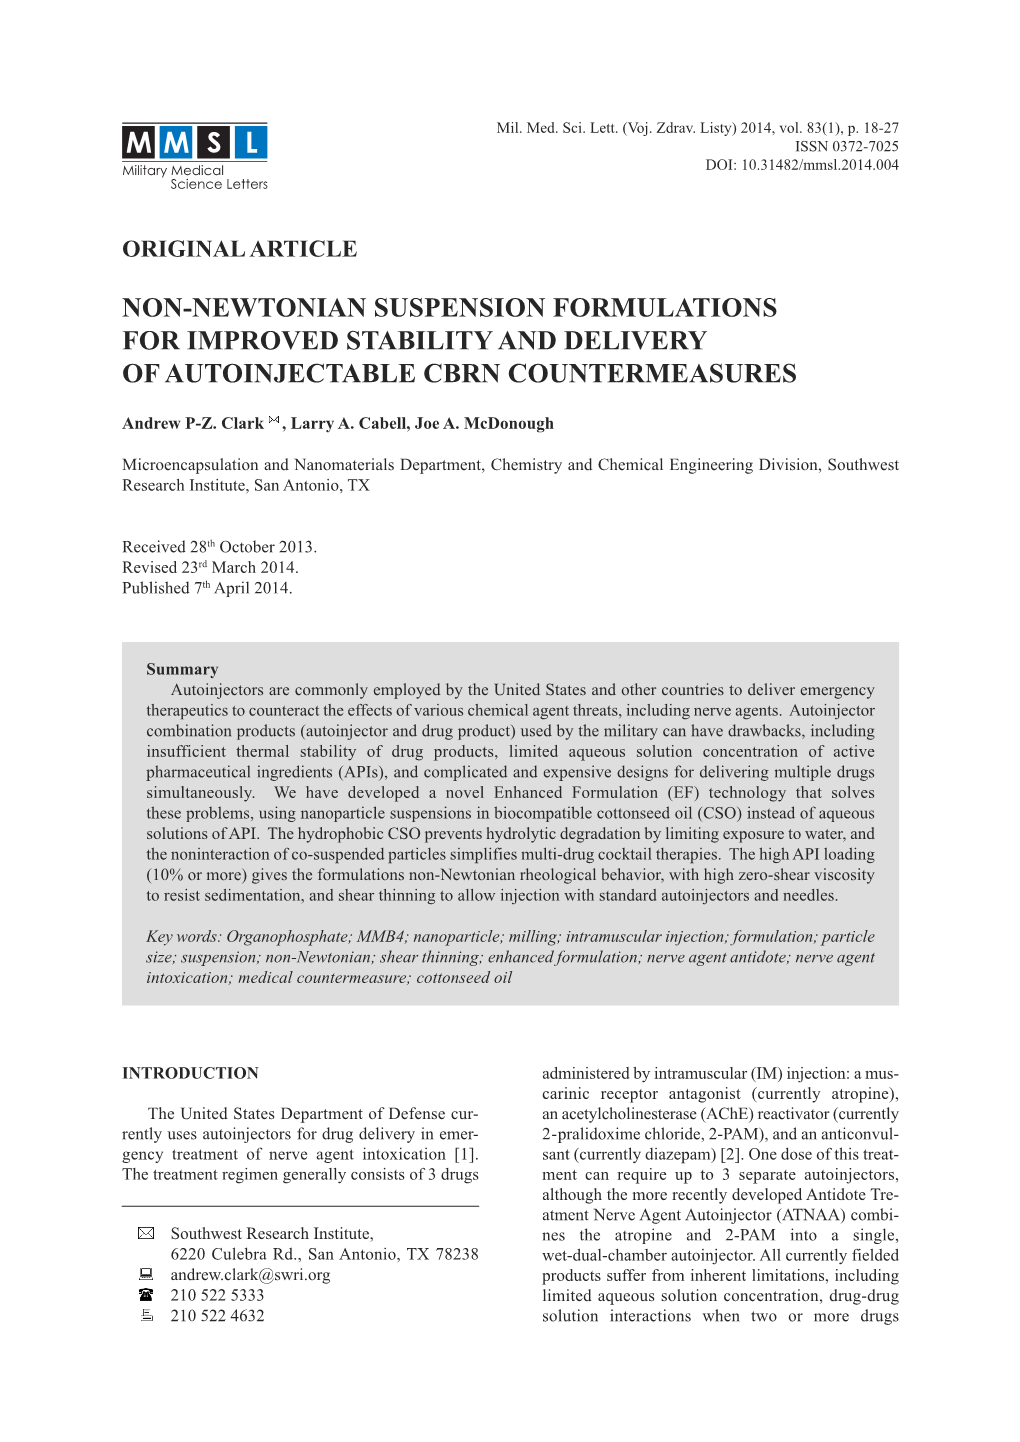 Non-Newtonian Suspension Formulations for Improved Stability and Delivery of Autoinjectable Cbrn Countermeasures